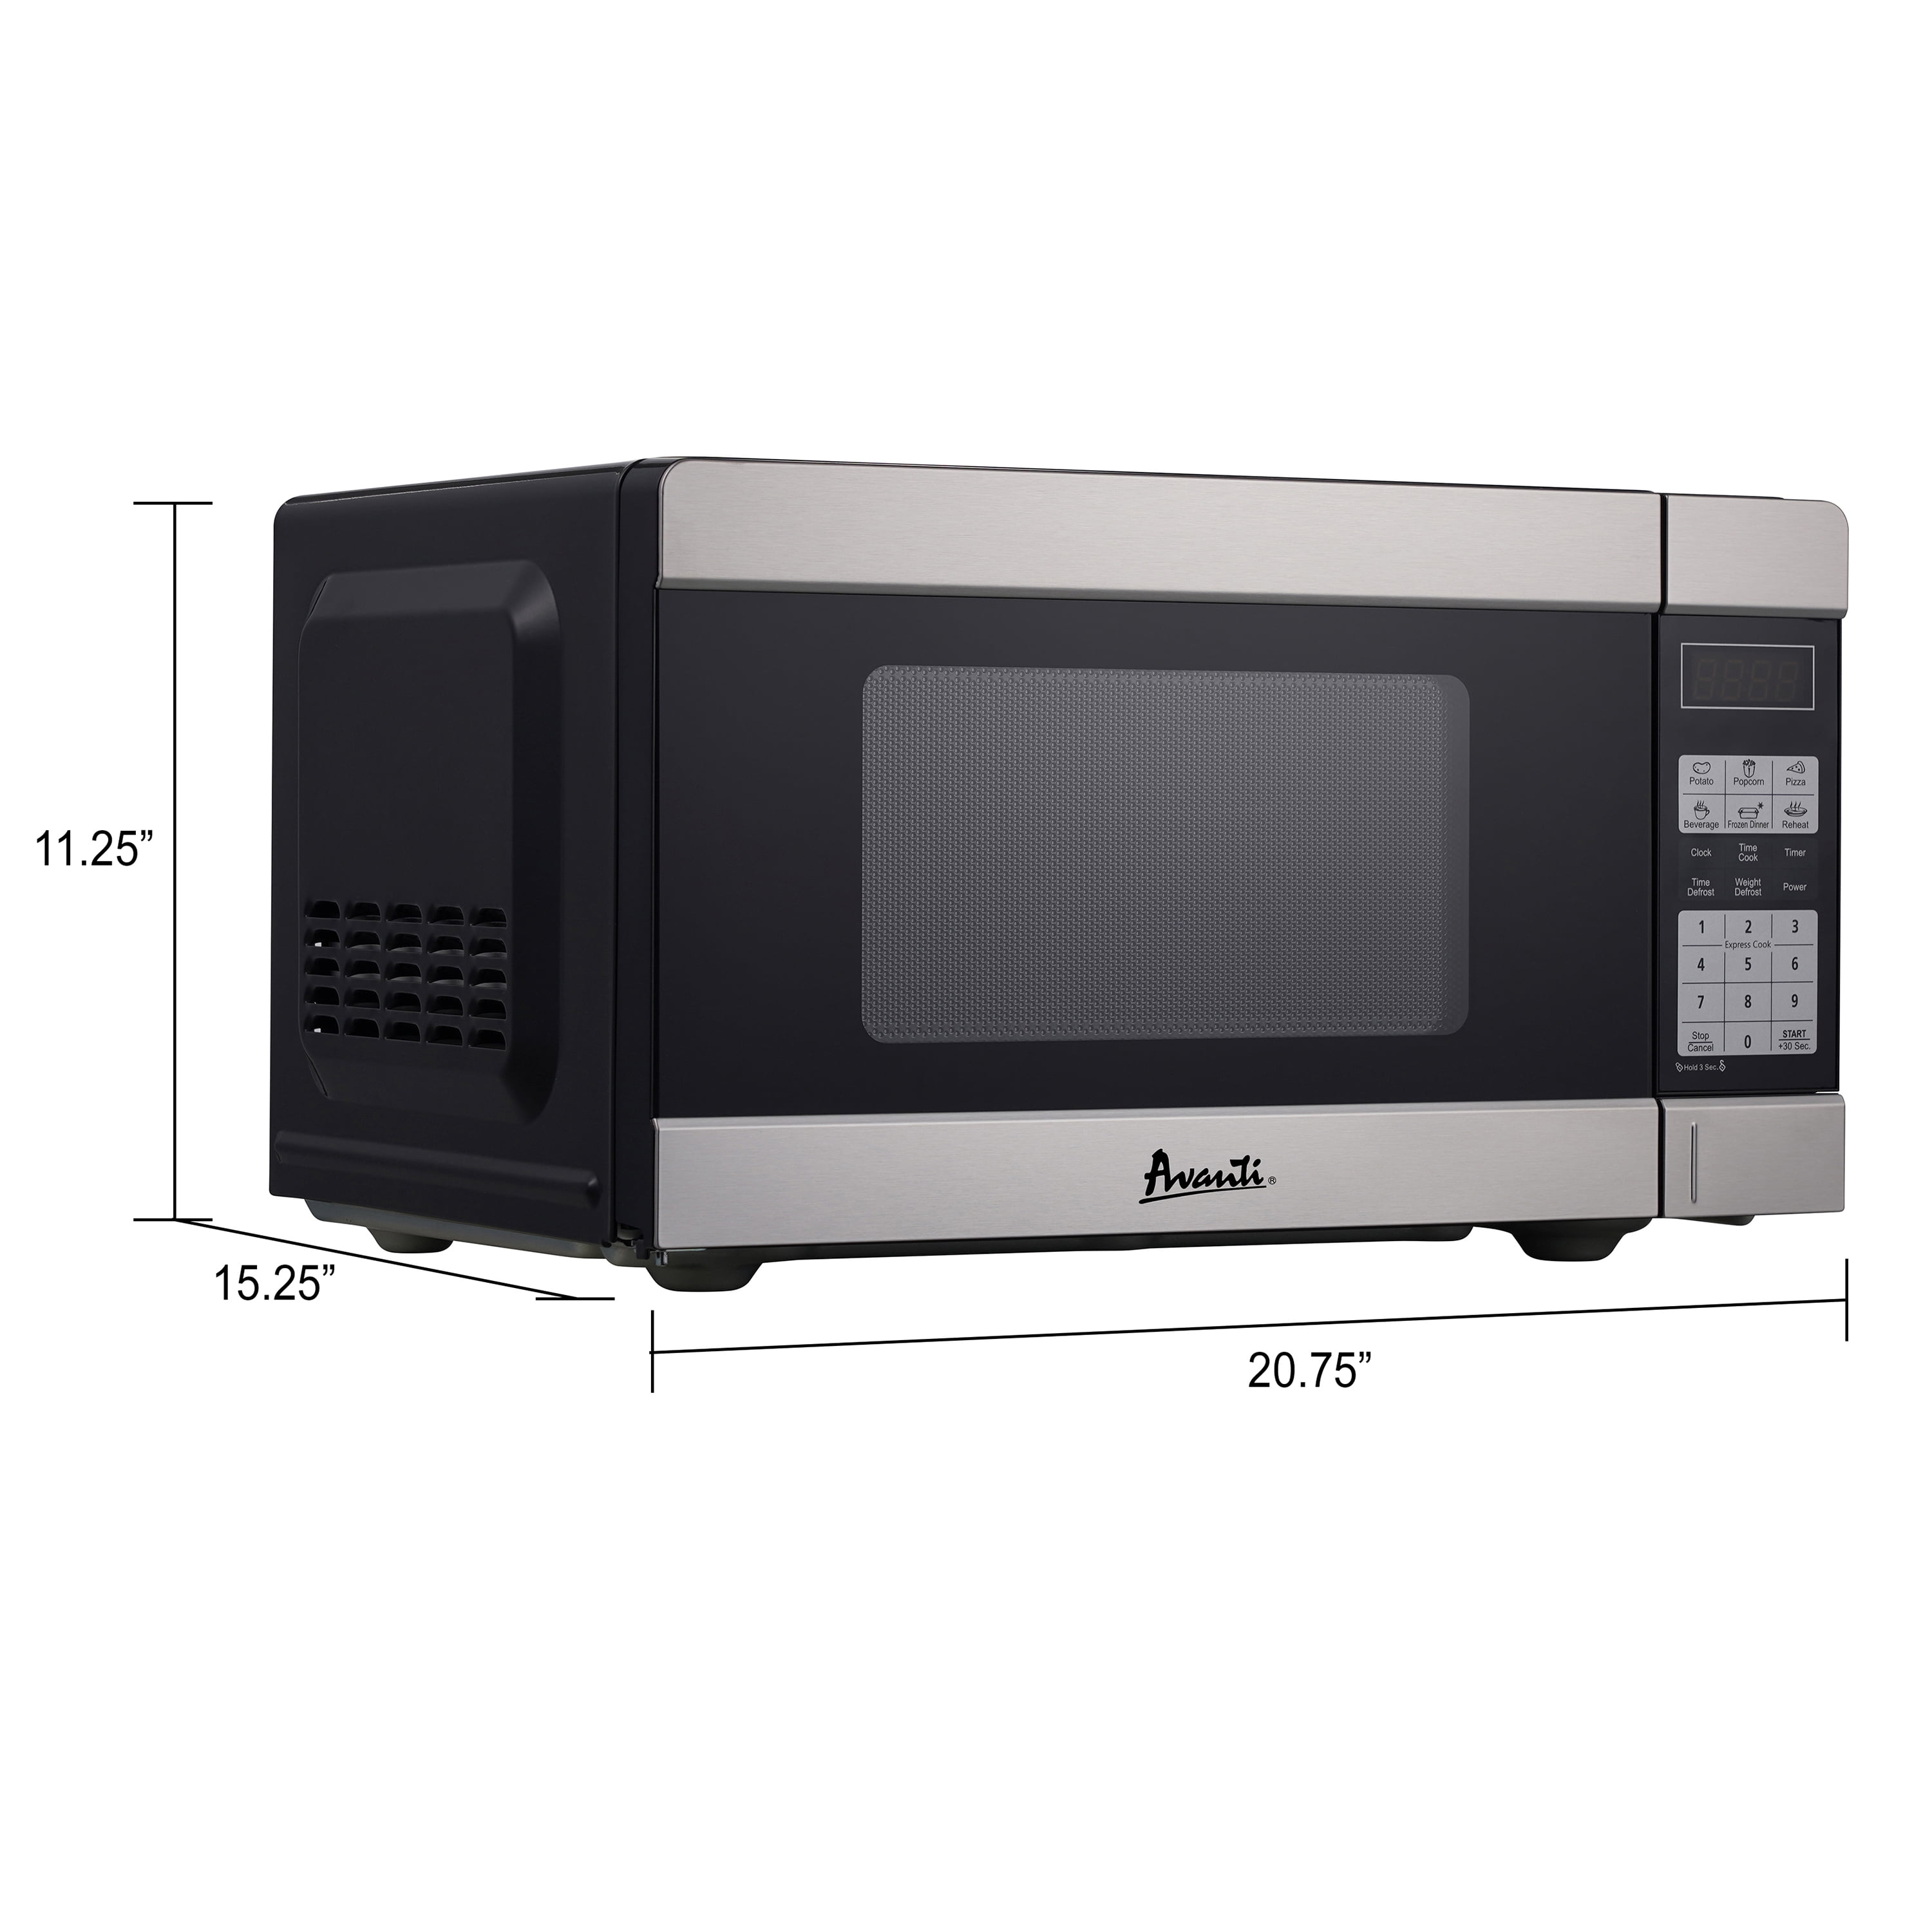 MO1108SST by Avanti - 1.1 cu. ft. Microwave Oven